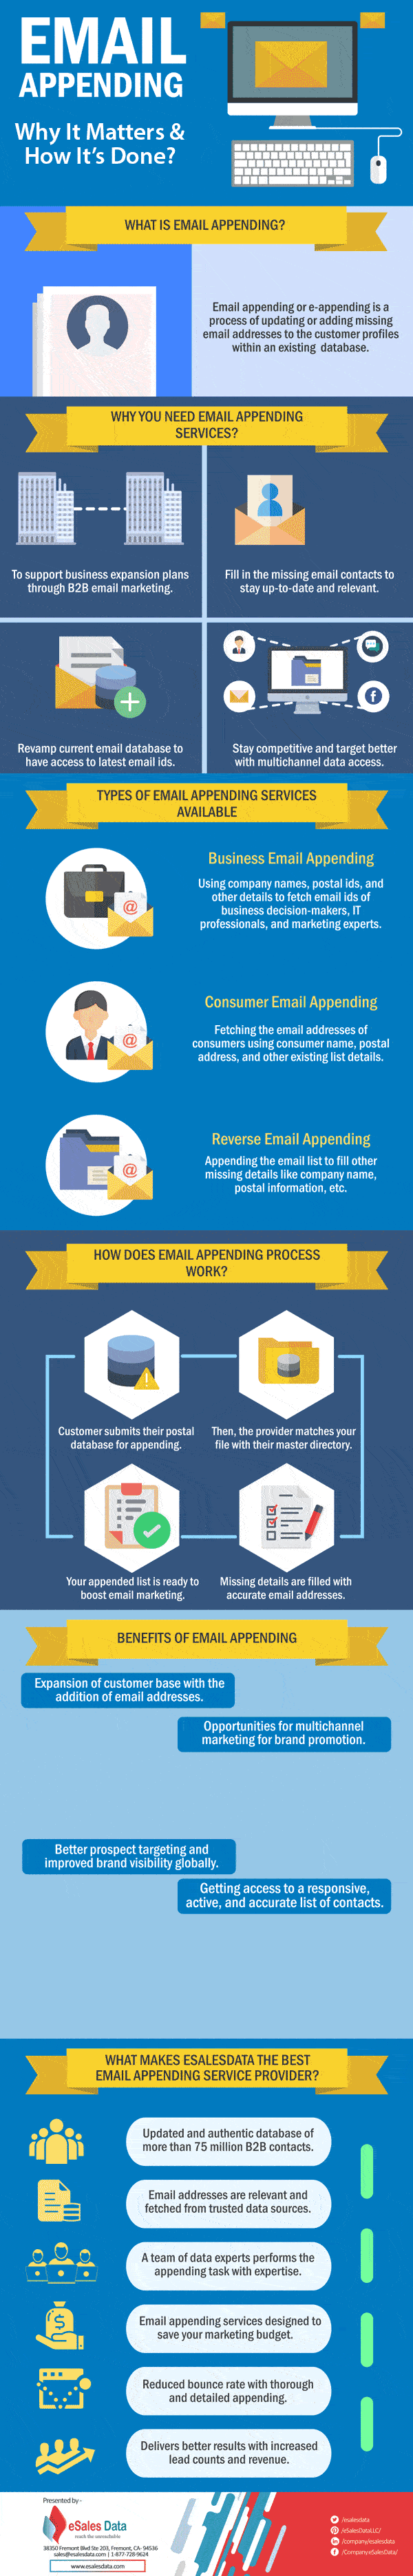 Overview of Email Appending